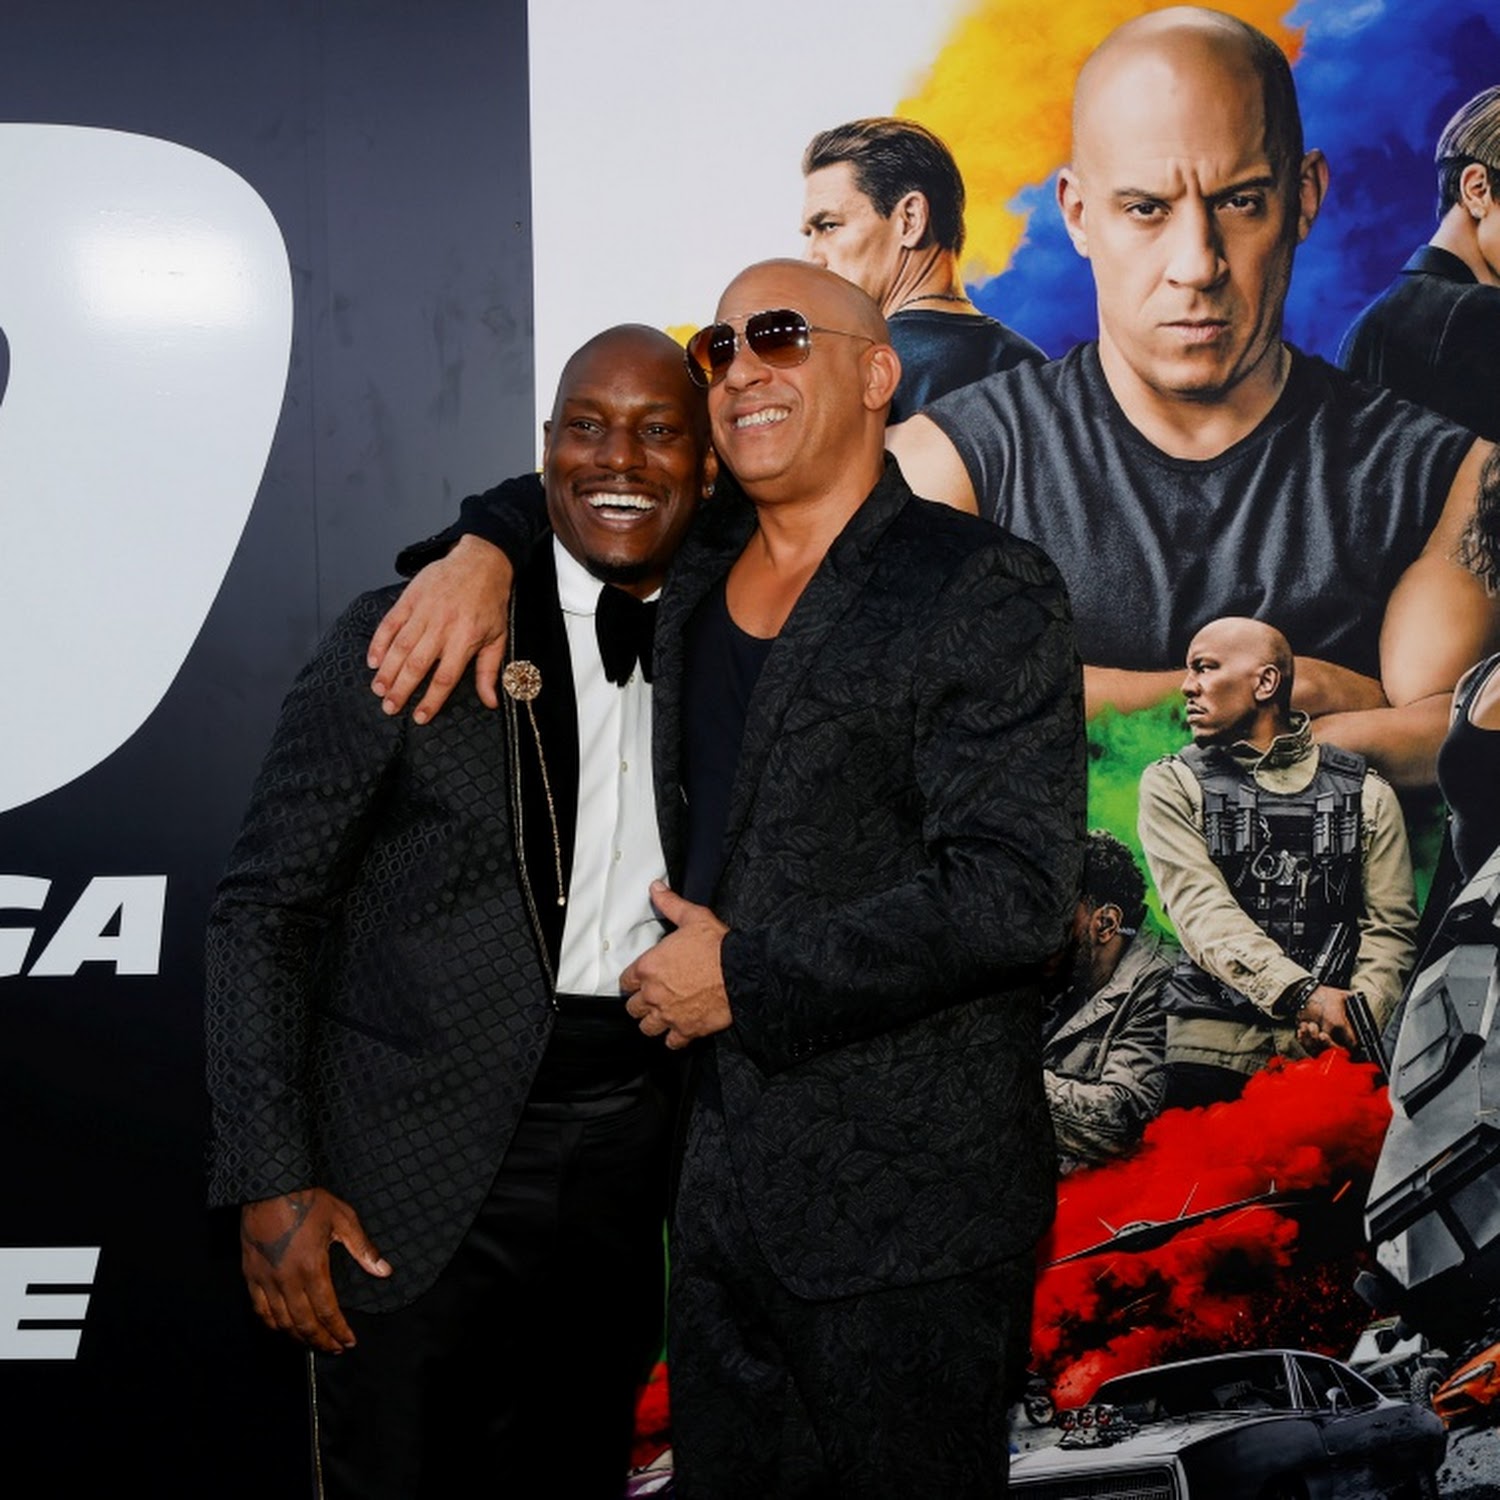 Fast and Furious actor Vin Diesel champions support for Hollywood